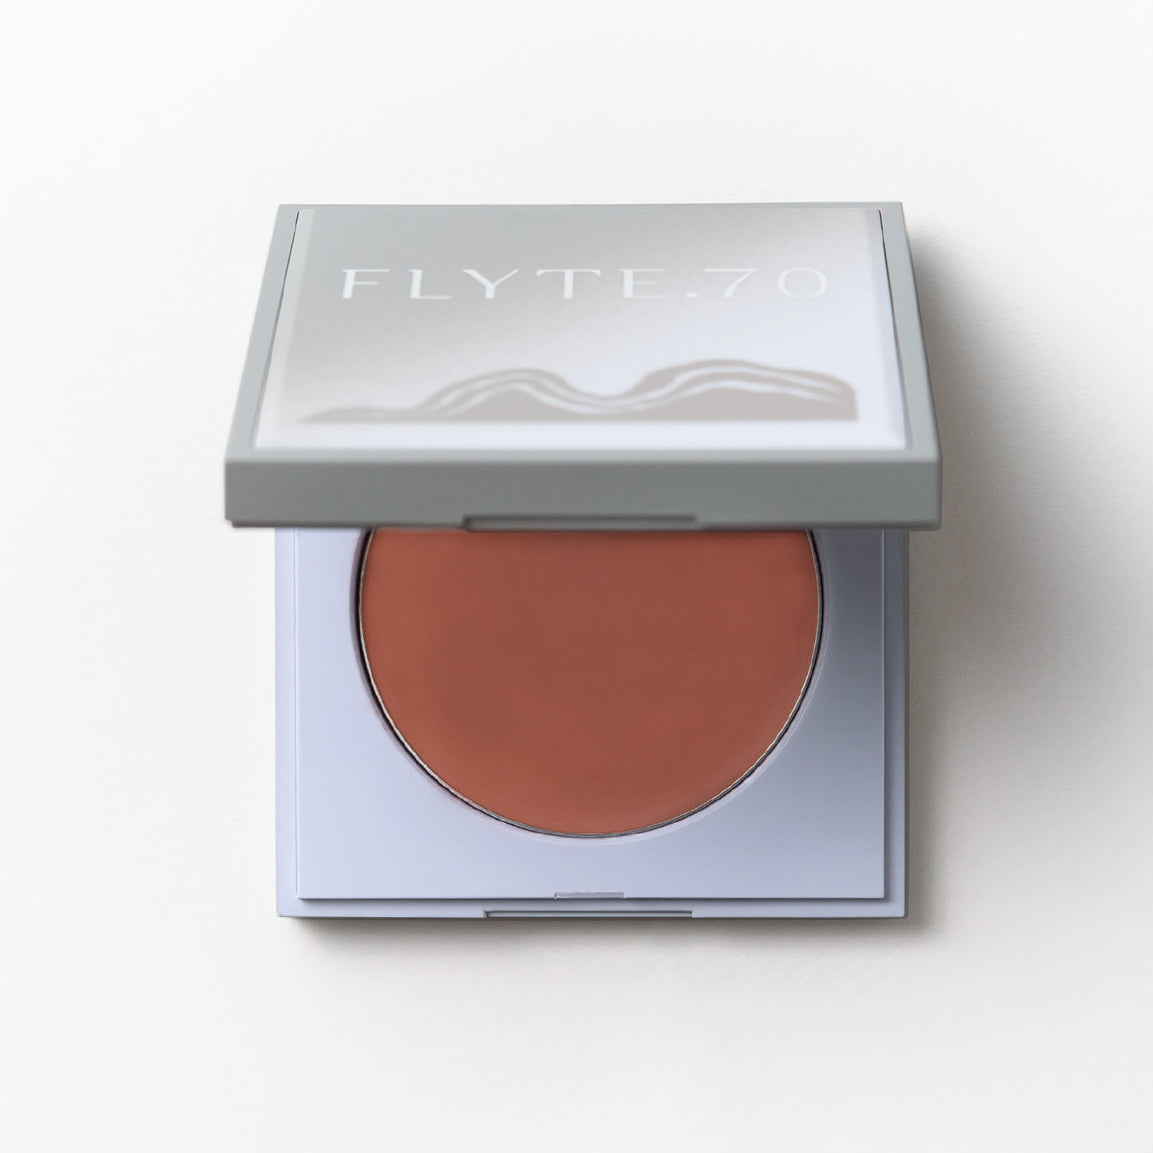 Compact of cream blush in burnished amber shade